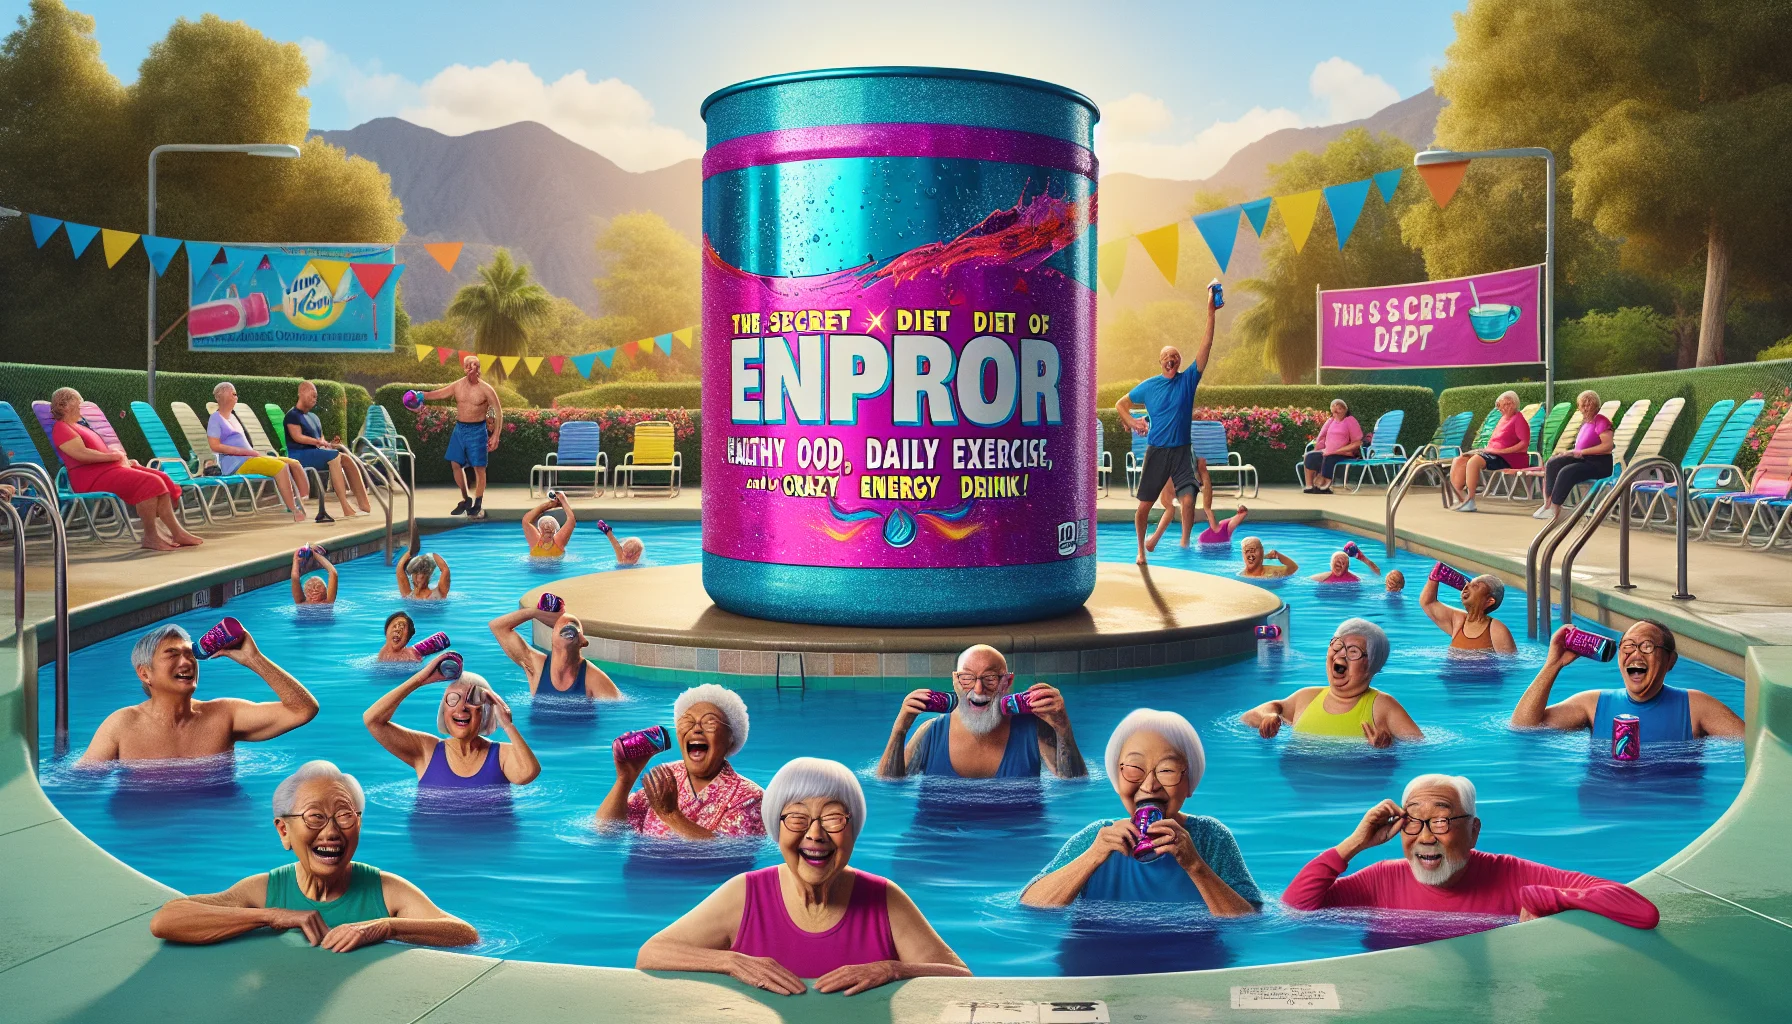 Imagine this hilarious and lifelike scenario: A group of elderly individuals from diverse descents like East Asian, Hispanic, and Middle-Eastern are engaged in an intense aqua fitness class in a vibrant community swimming pool. On the poolside, there is a boldly labelled giant container filled with a sparkling, neon-colored energy drink. Our senior citizens take a quick break to guzzle the potent energy drink, and then with radiant grins and renewed vigor, they perform energetic, comical dance moves in the water. A sign in the background promotes the secret diet of 'Healthy food, daily exercise, and a hint of crazy energy drink!'